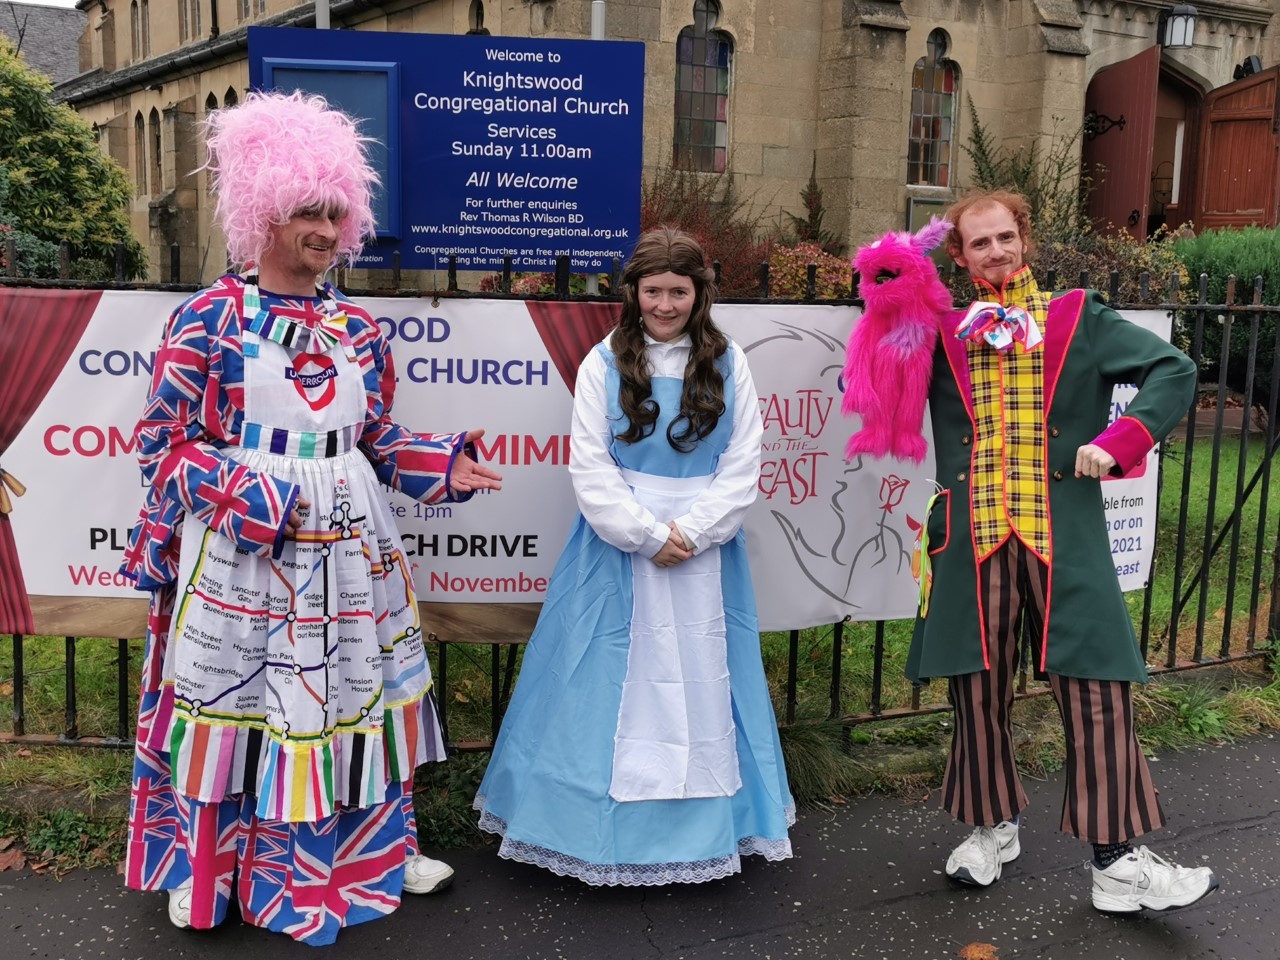 Knightswood Congregational Church is staging Beauty and the Beast this week